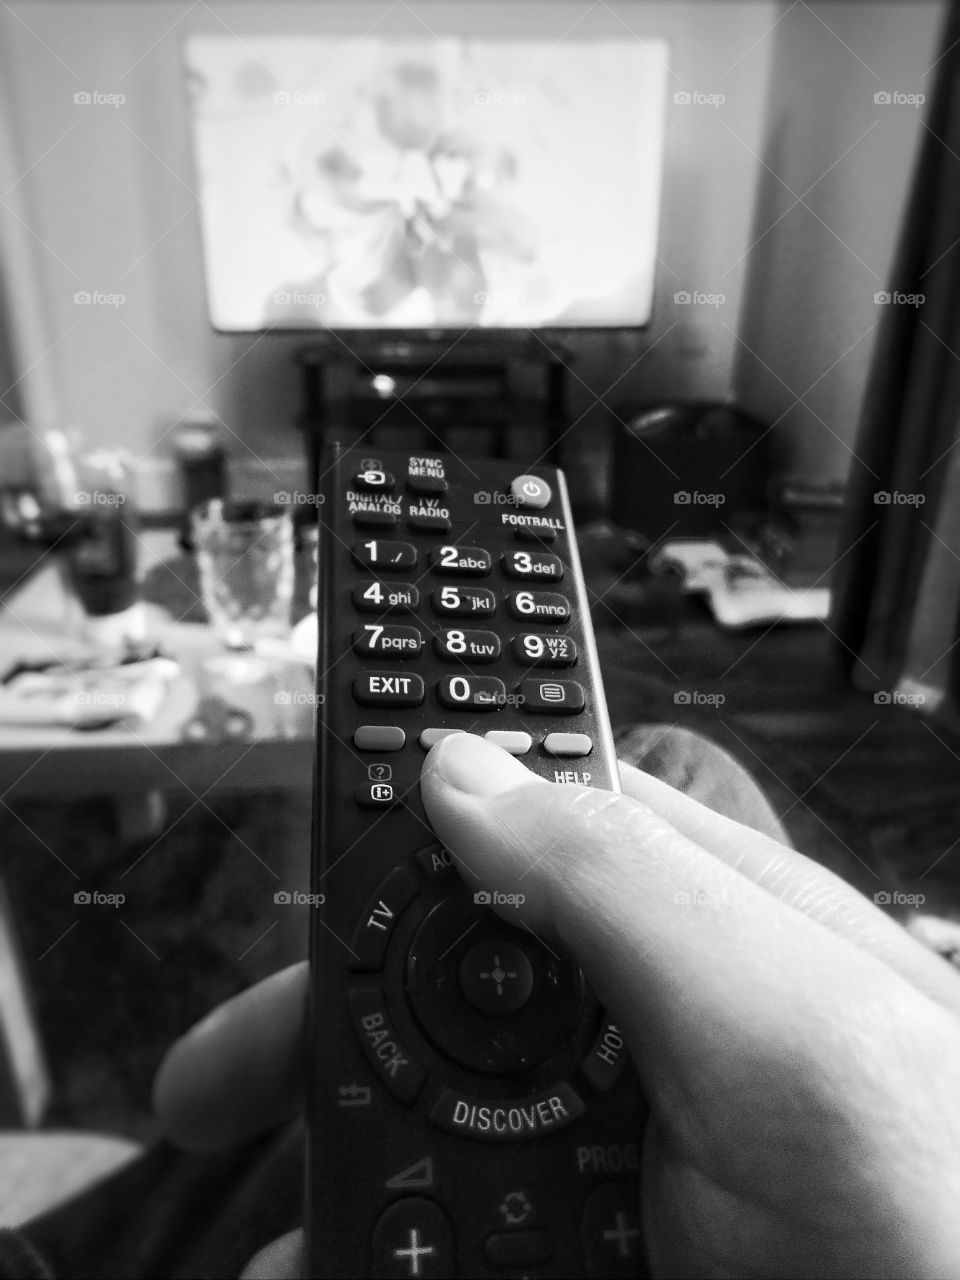 remote and I are best friends for today